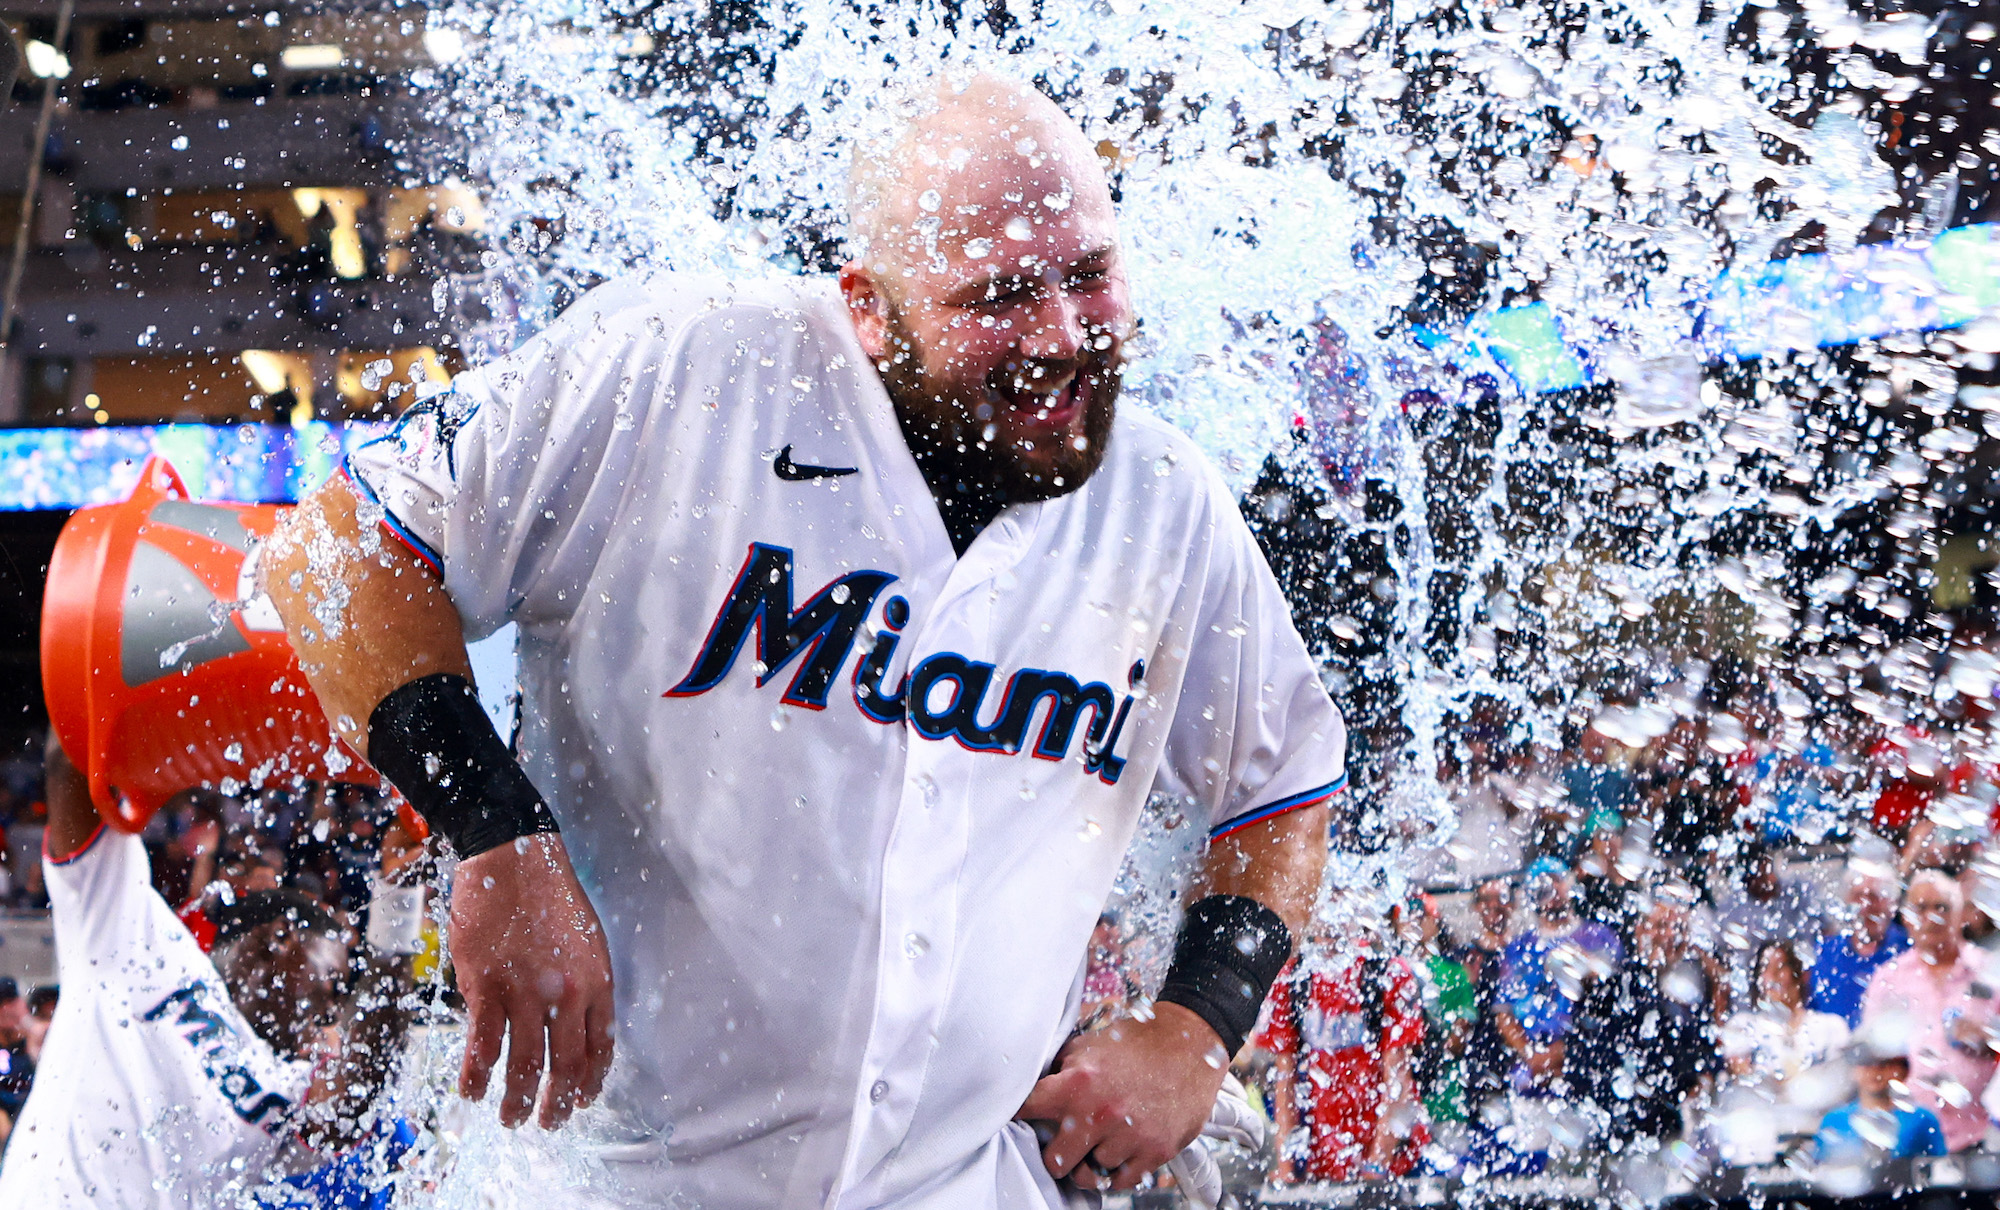 MIAMI, FLORIDA - AUGUST 13: Jake Burger #36 of the Miami Marlins receives a gatorade bath after hitting a walk-off RBI single to defeat the New York Yankees at loanDepot park on August 13, 2023 in Miami, Florida. (Photo by Megan Briggs/Getty Images)